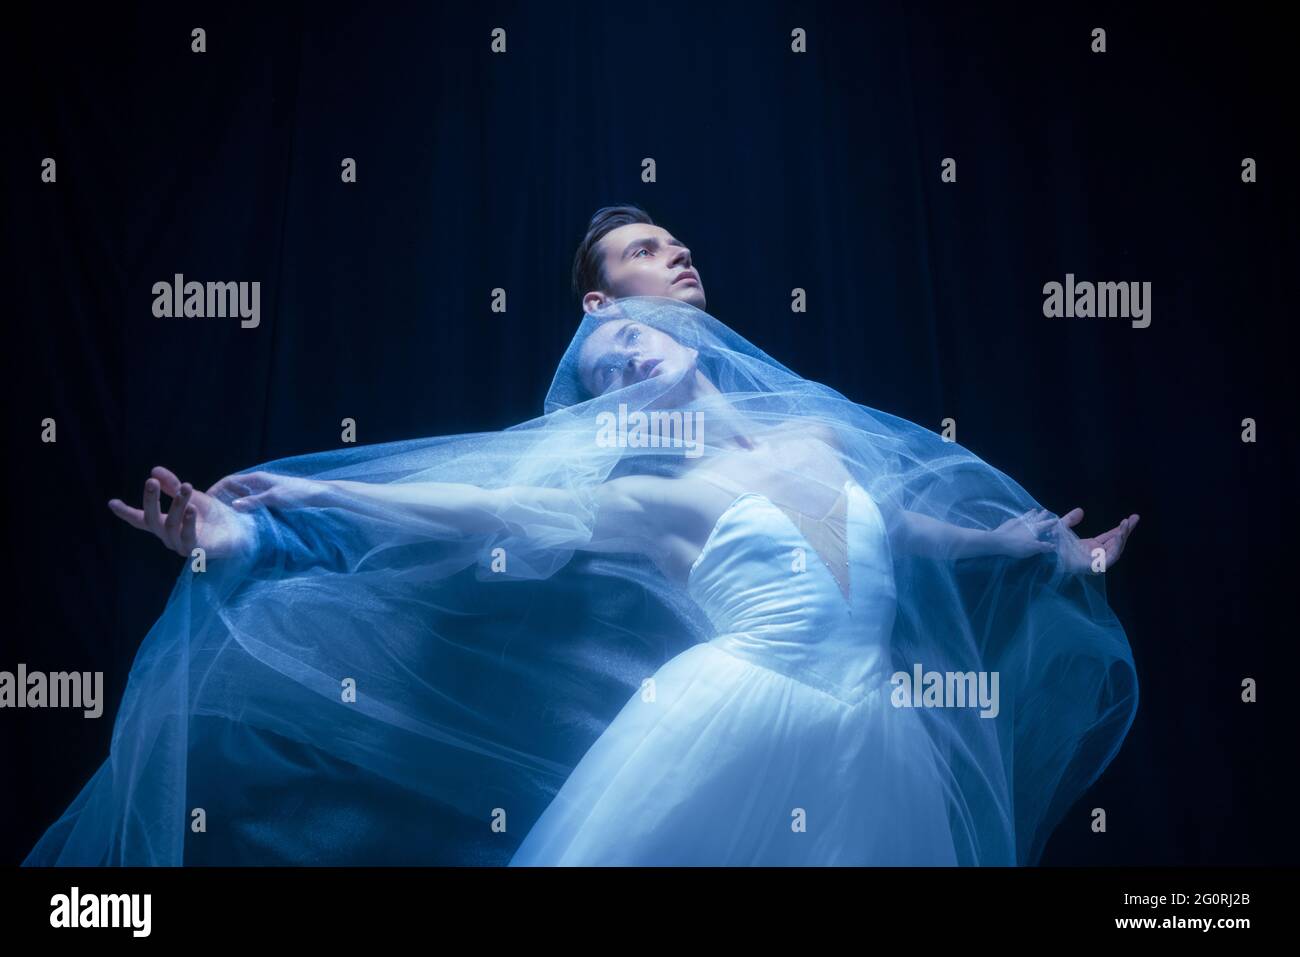 Young woman in wedding dress and man, two ballet dancers in art performance dancing isolated over dark background. Stock Photo